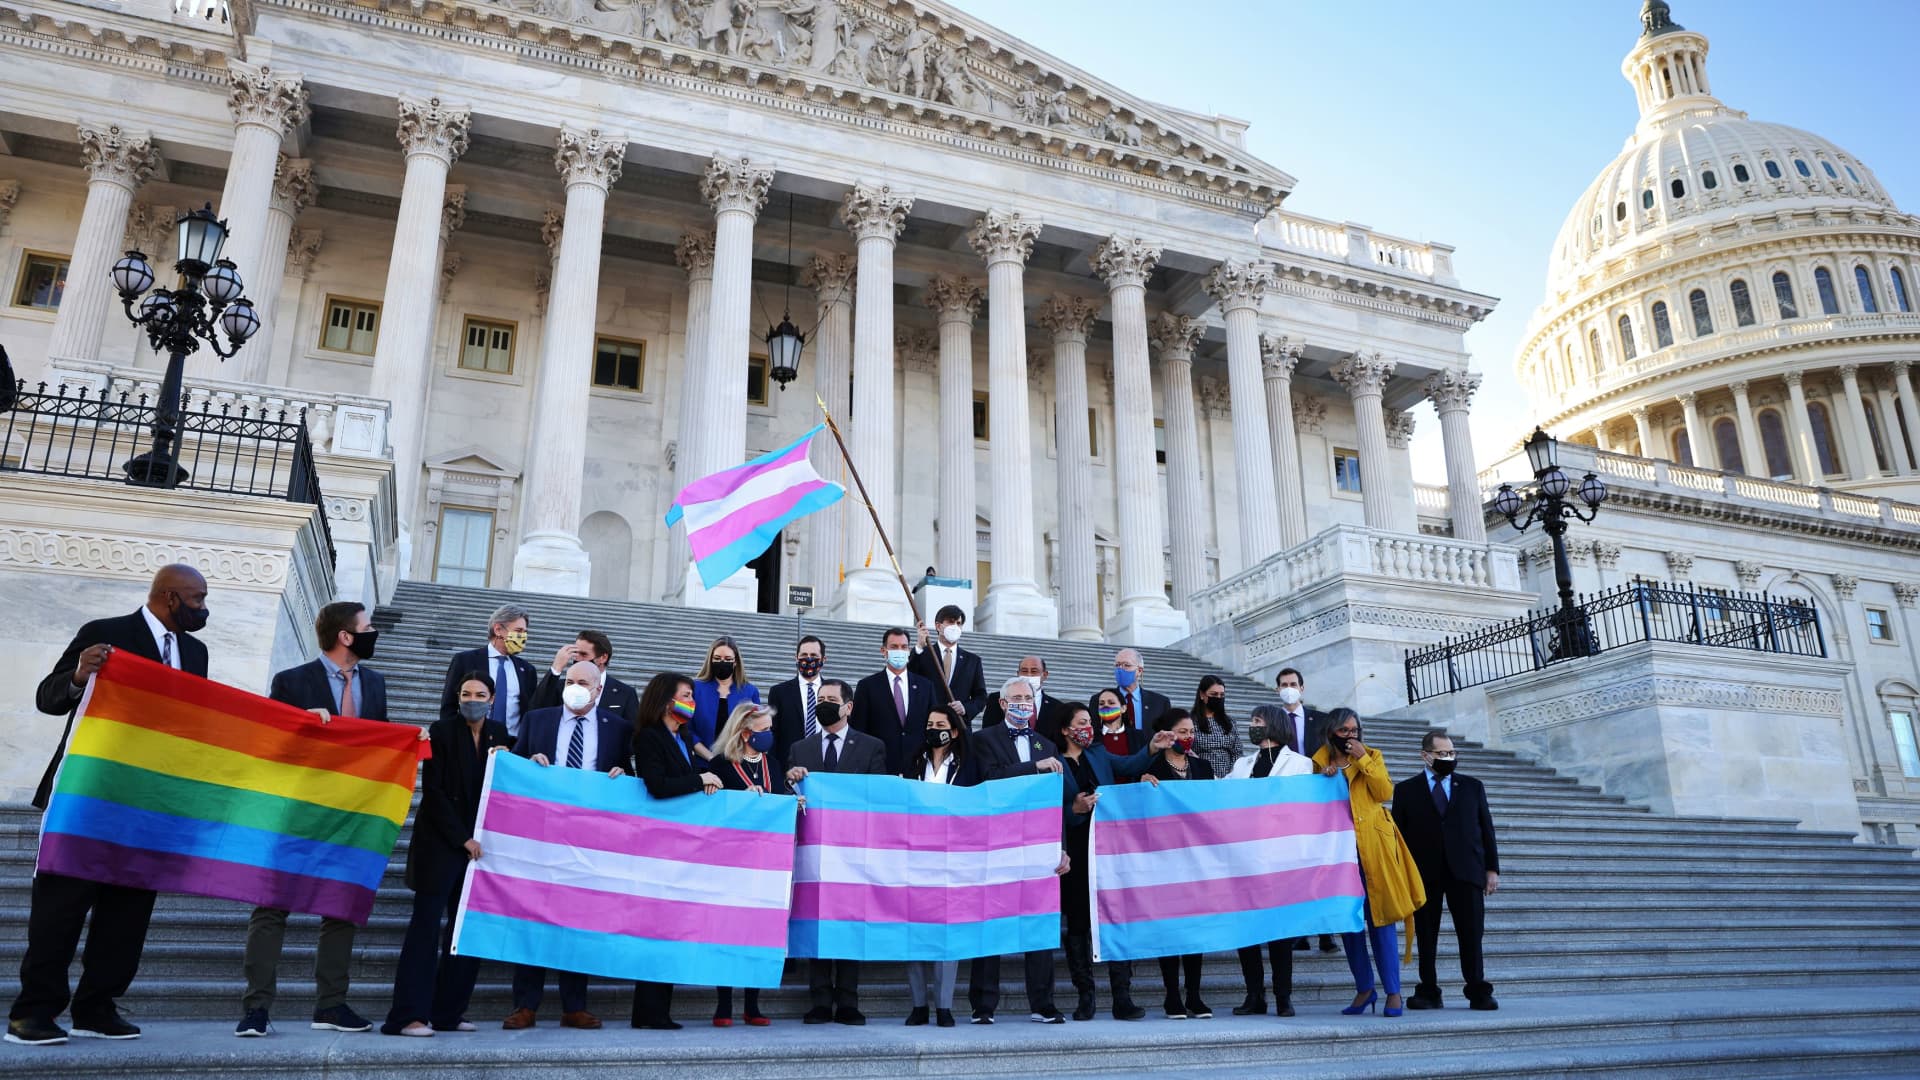 Democratic members of the U.S. House of Representatives pose for a photograph holding LBGT+ and Transgender Pride flags on the steps of the U.S. Capitol ahead of a vote on the Equality Act on Capitol Hill in Washington, February 25, 2021.